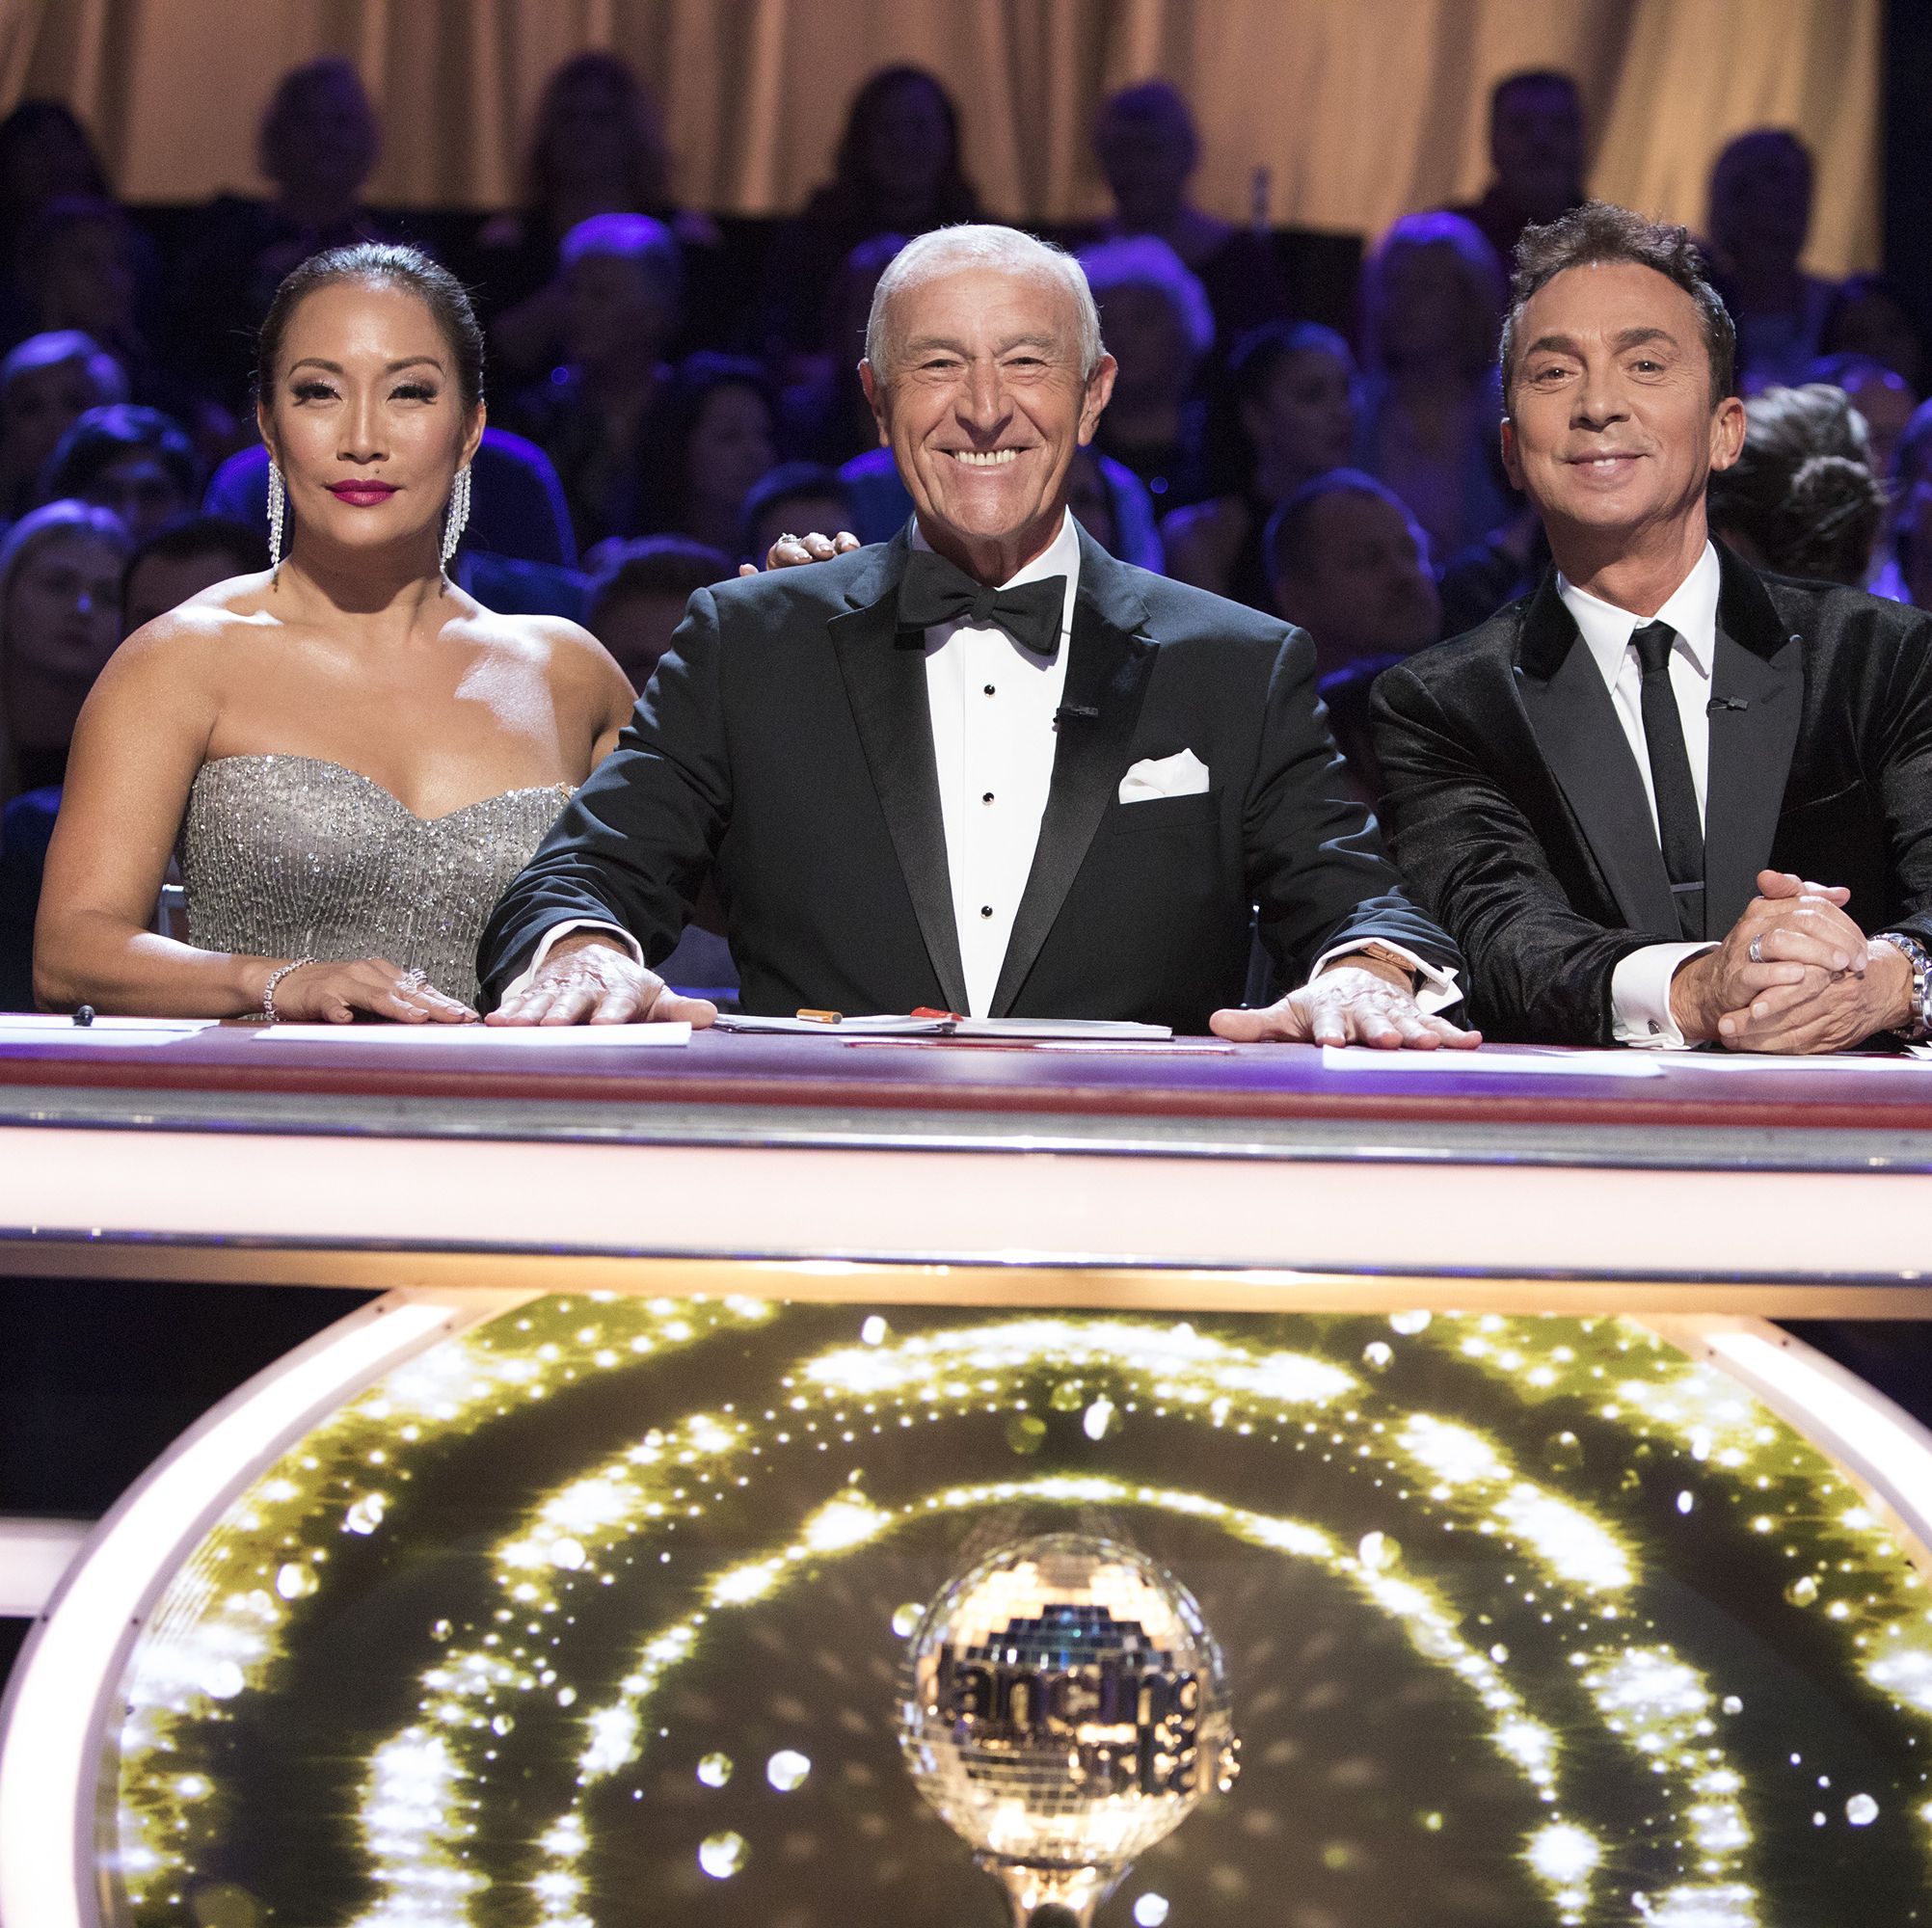 A 'DWTS' Judge Just Made a Shocking Announcement About Their Departure